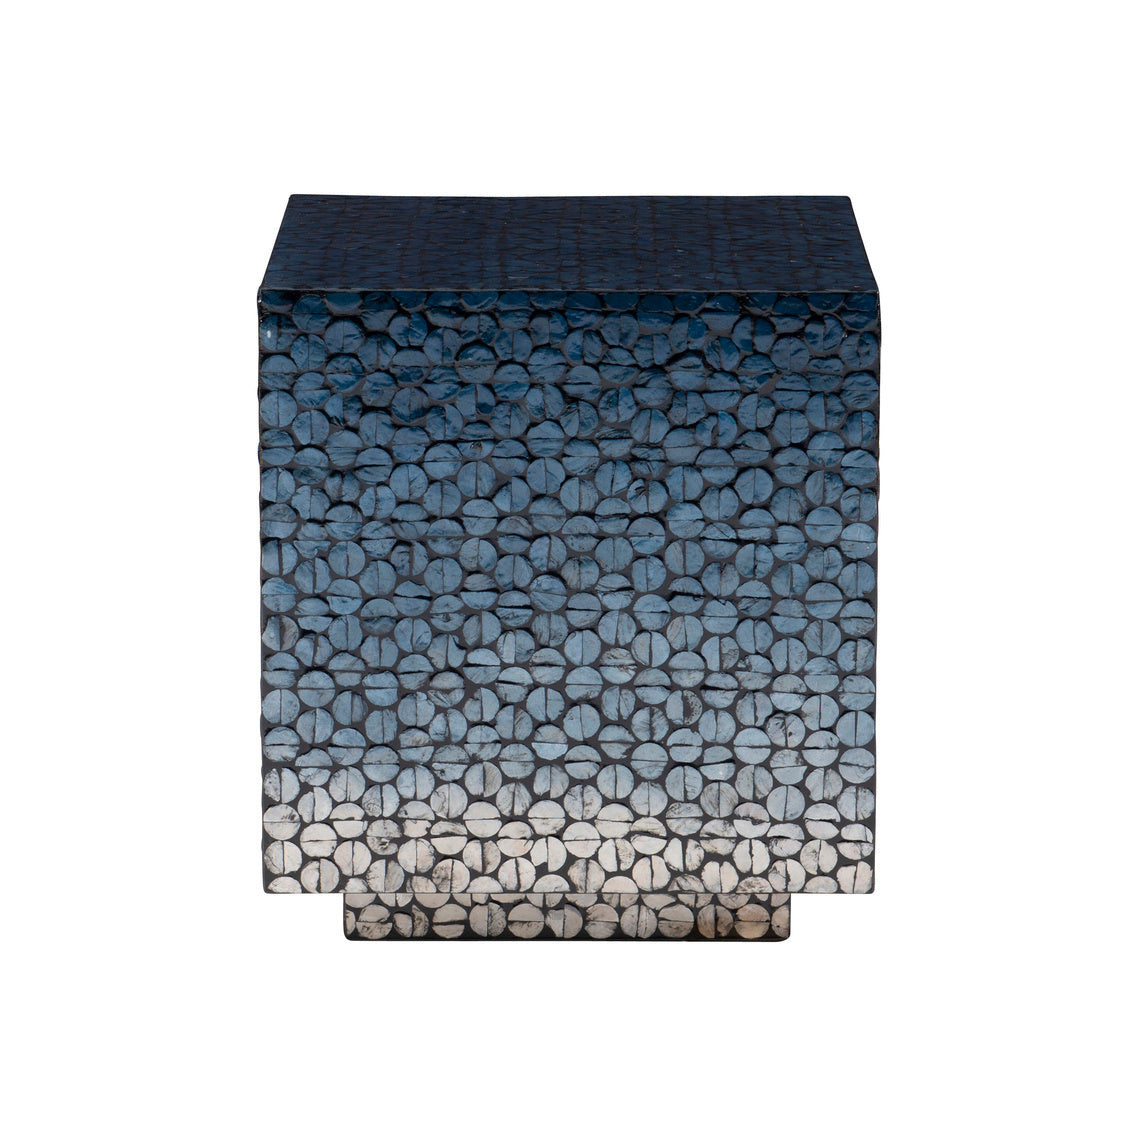 Stunning Black Shimmer Accent Square Side Table